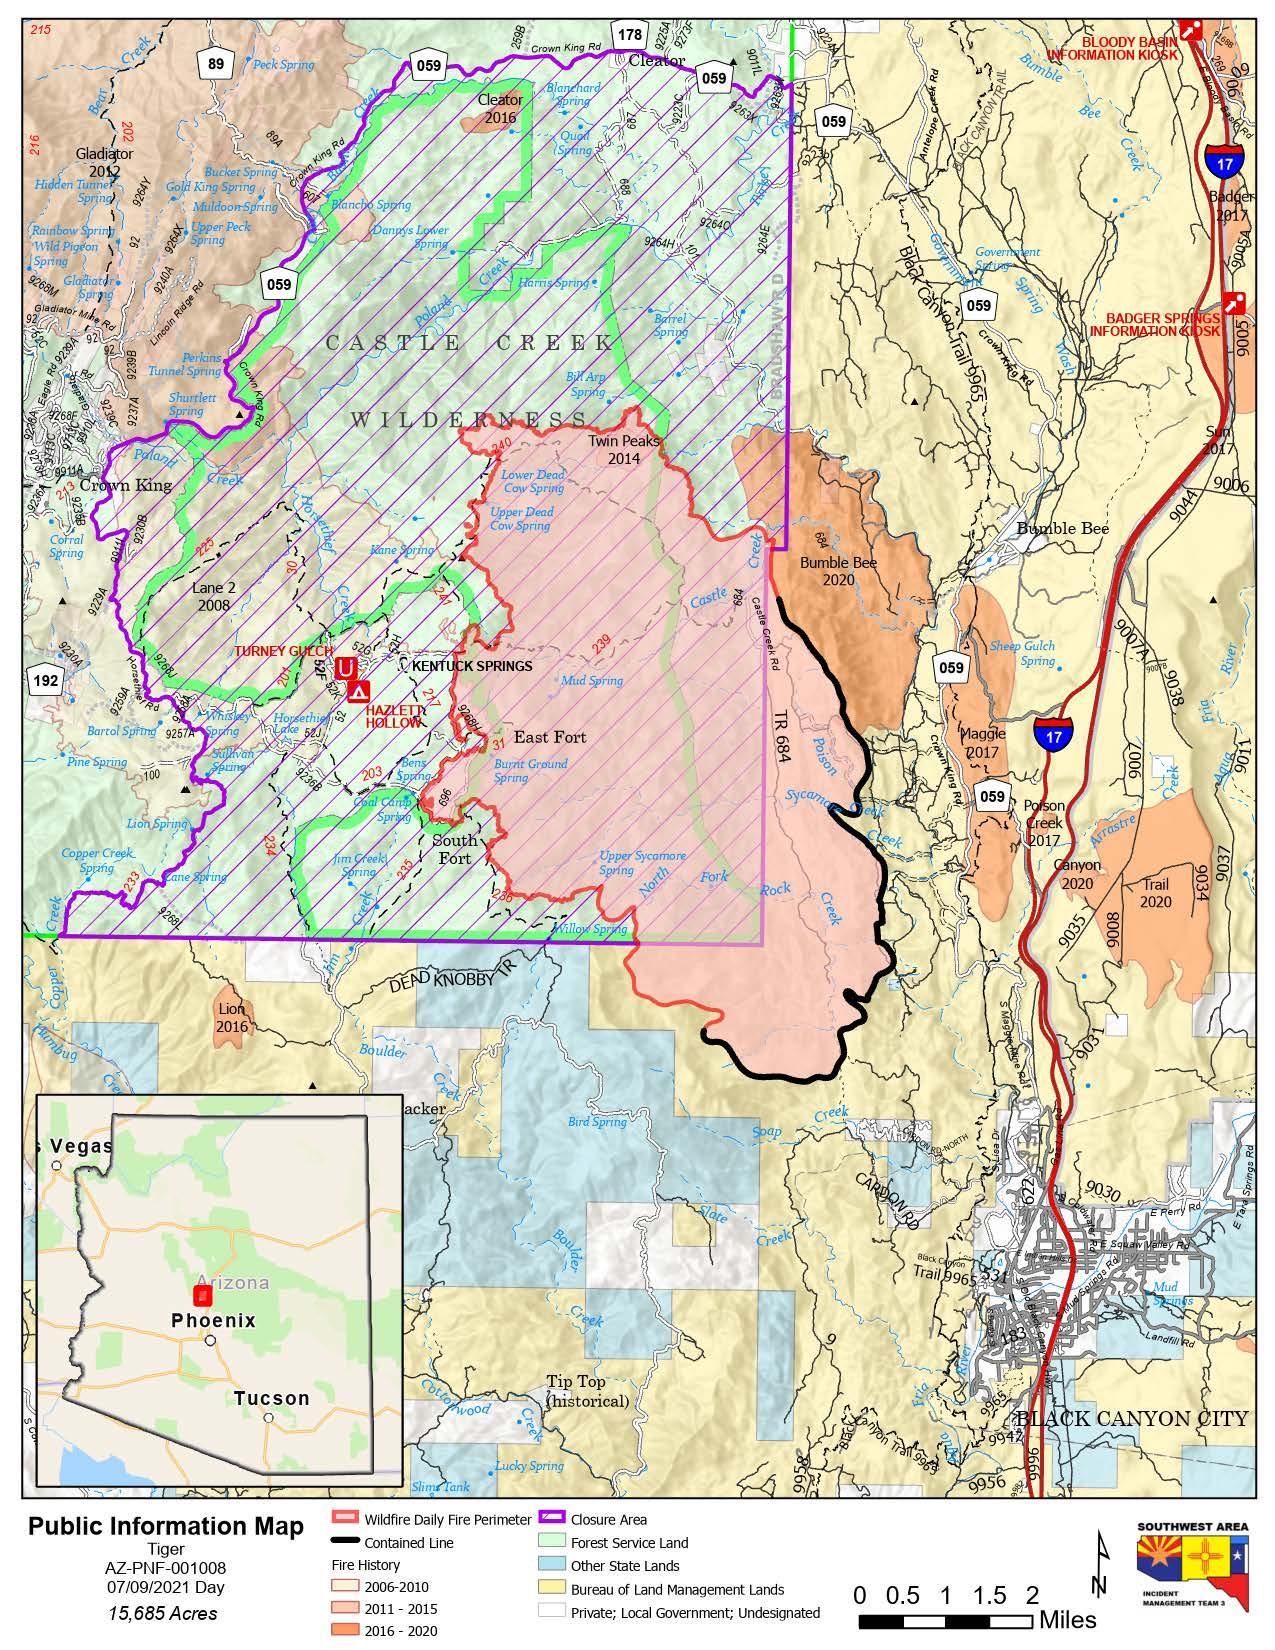 Tiger Fire Public Information Map July 9, 2021